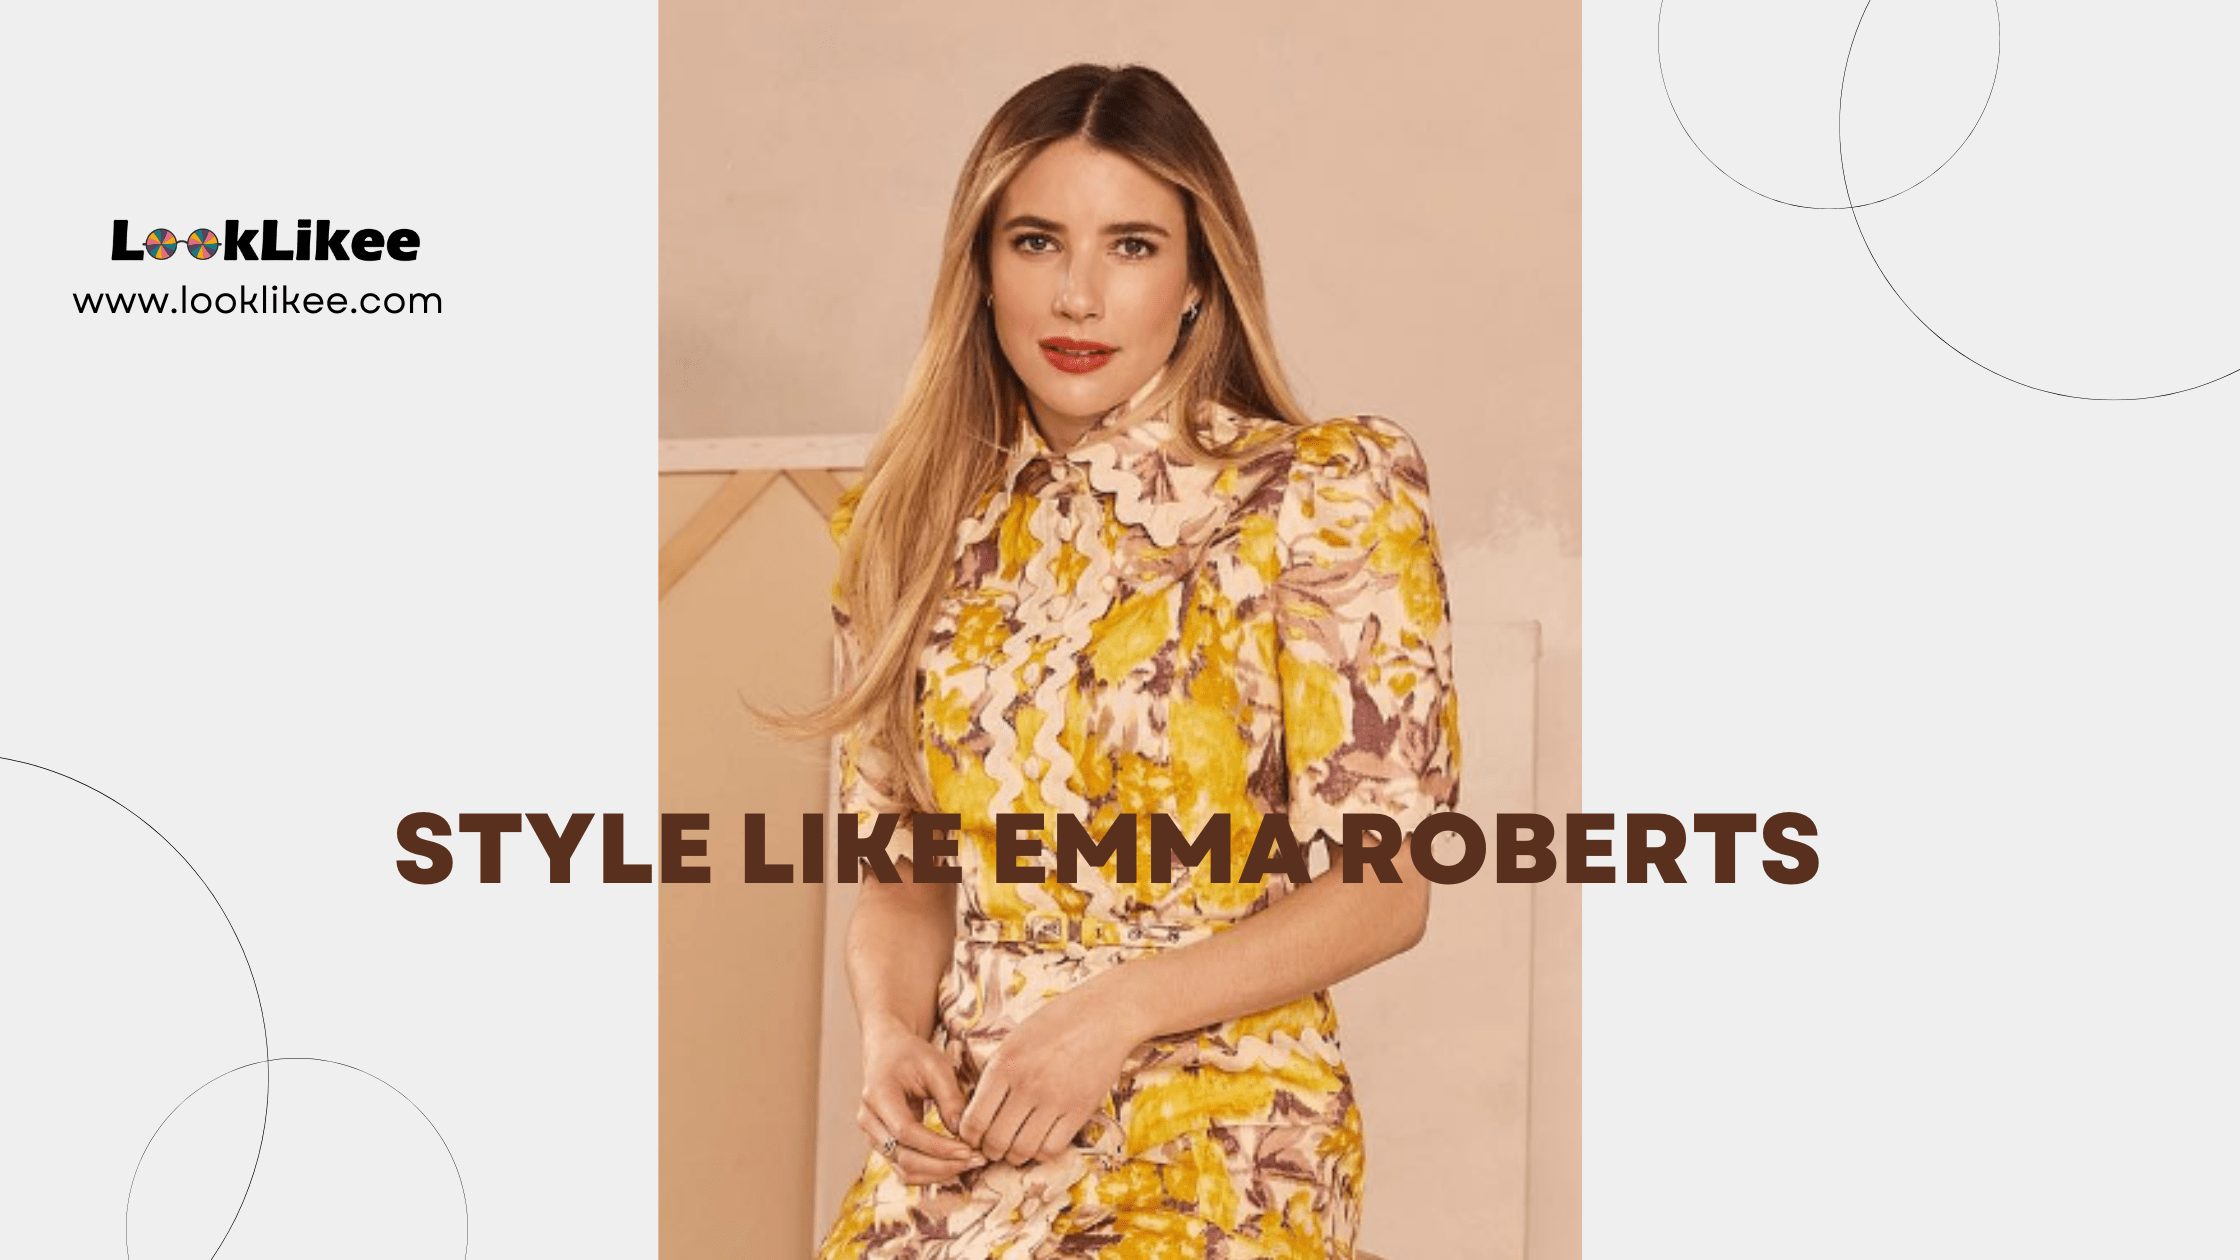 Steal Emma Roberts' Style: Dress like a Hollywood Fashion Icon